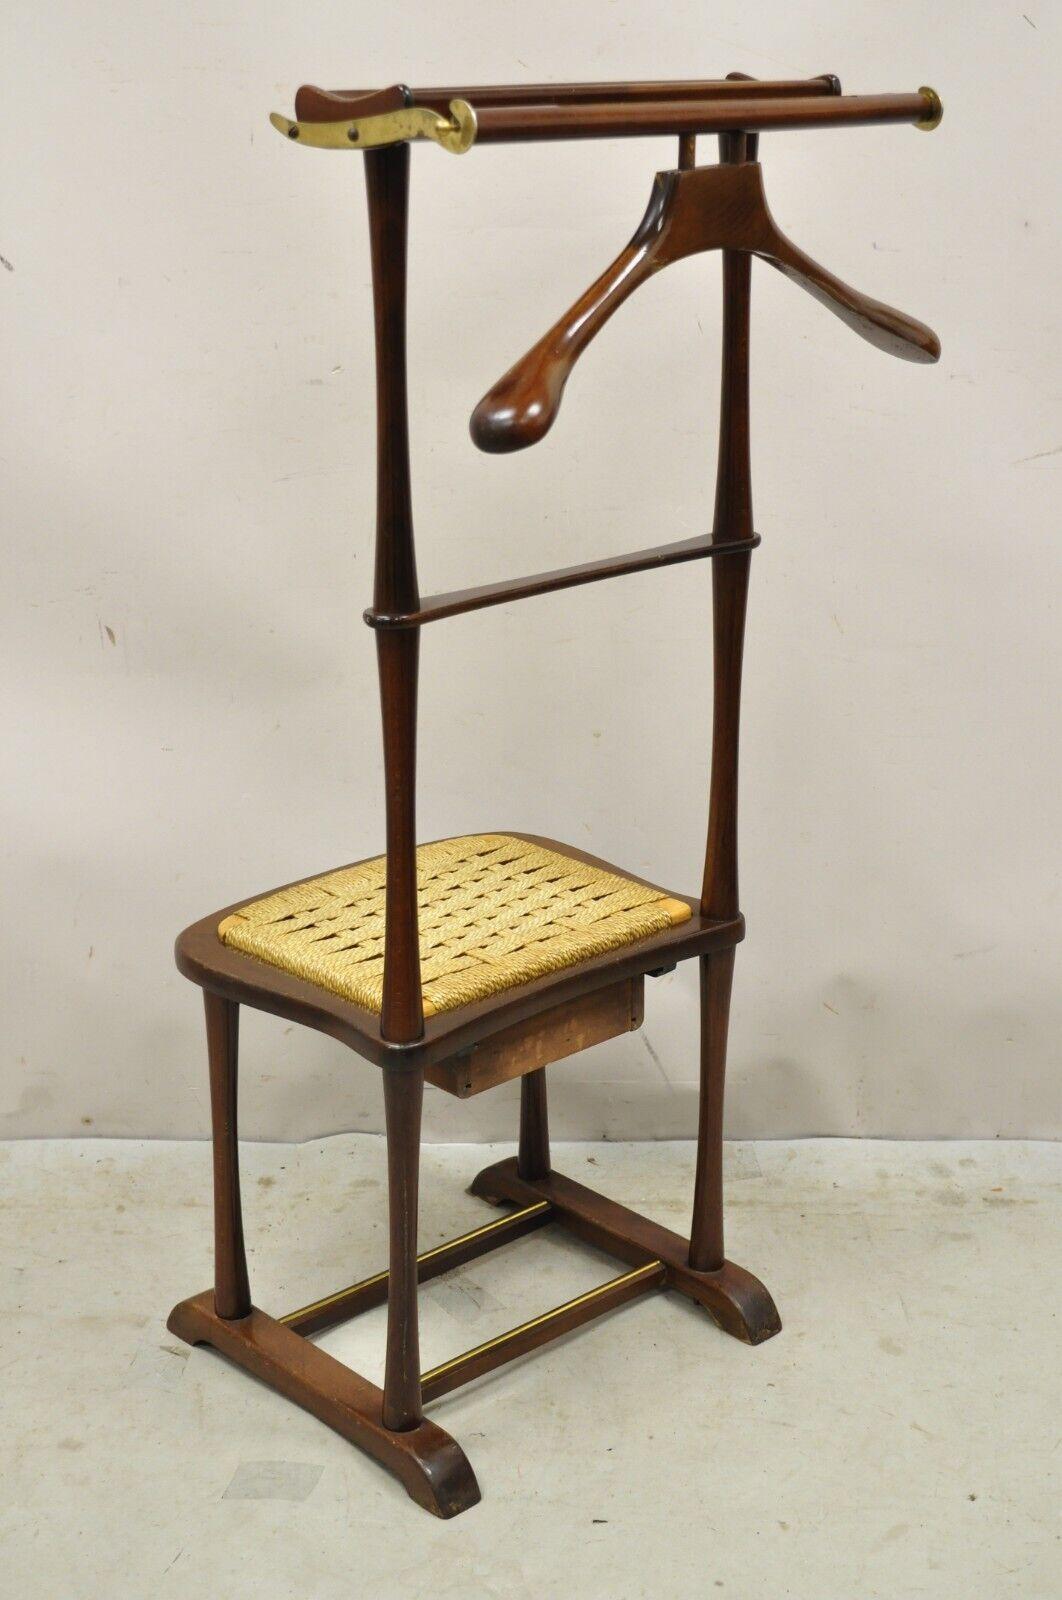 Vintage SPQR Mid Century Italian Modern Birch and Brass Clothing Valet Chair with Drawer. Item features. Circa Mid 20th Century.
Measurements: 42.5